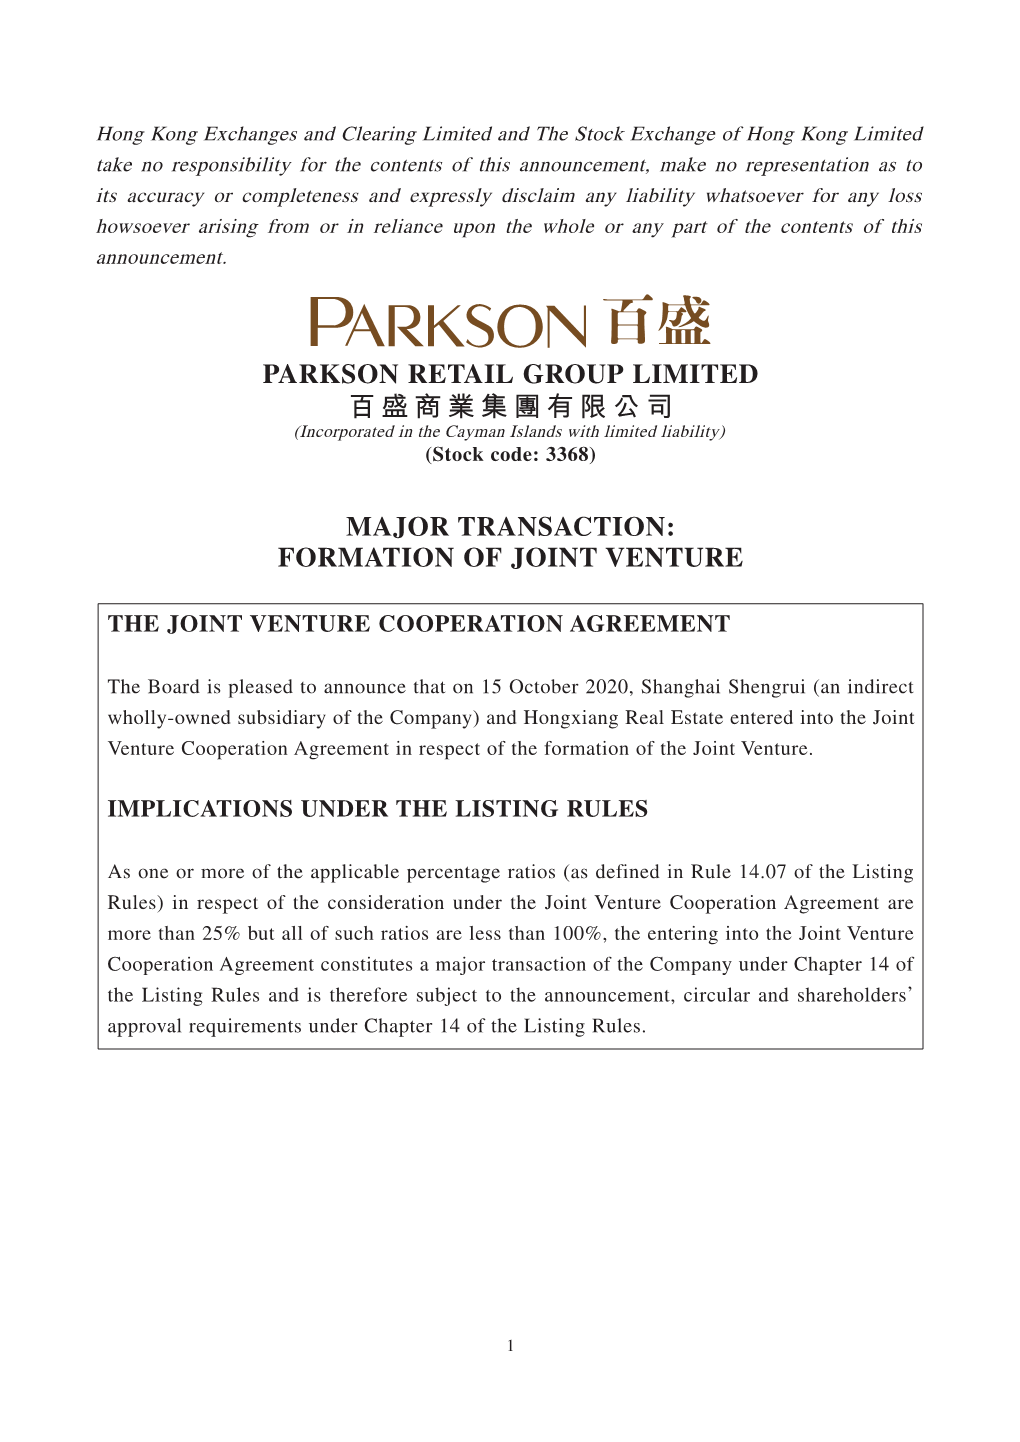 Formation of Joint Venture